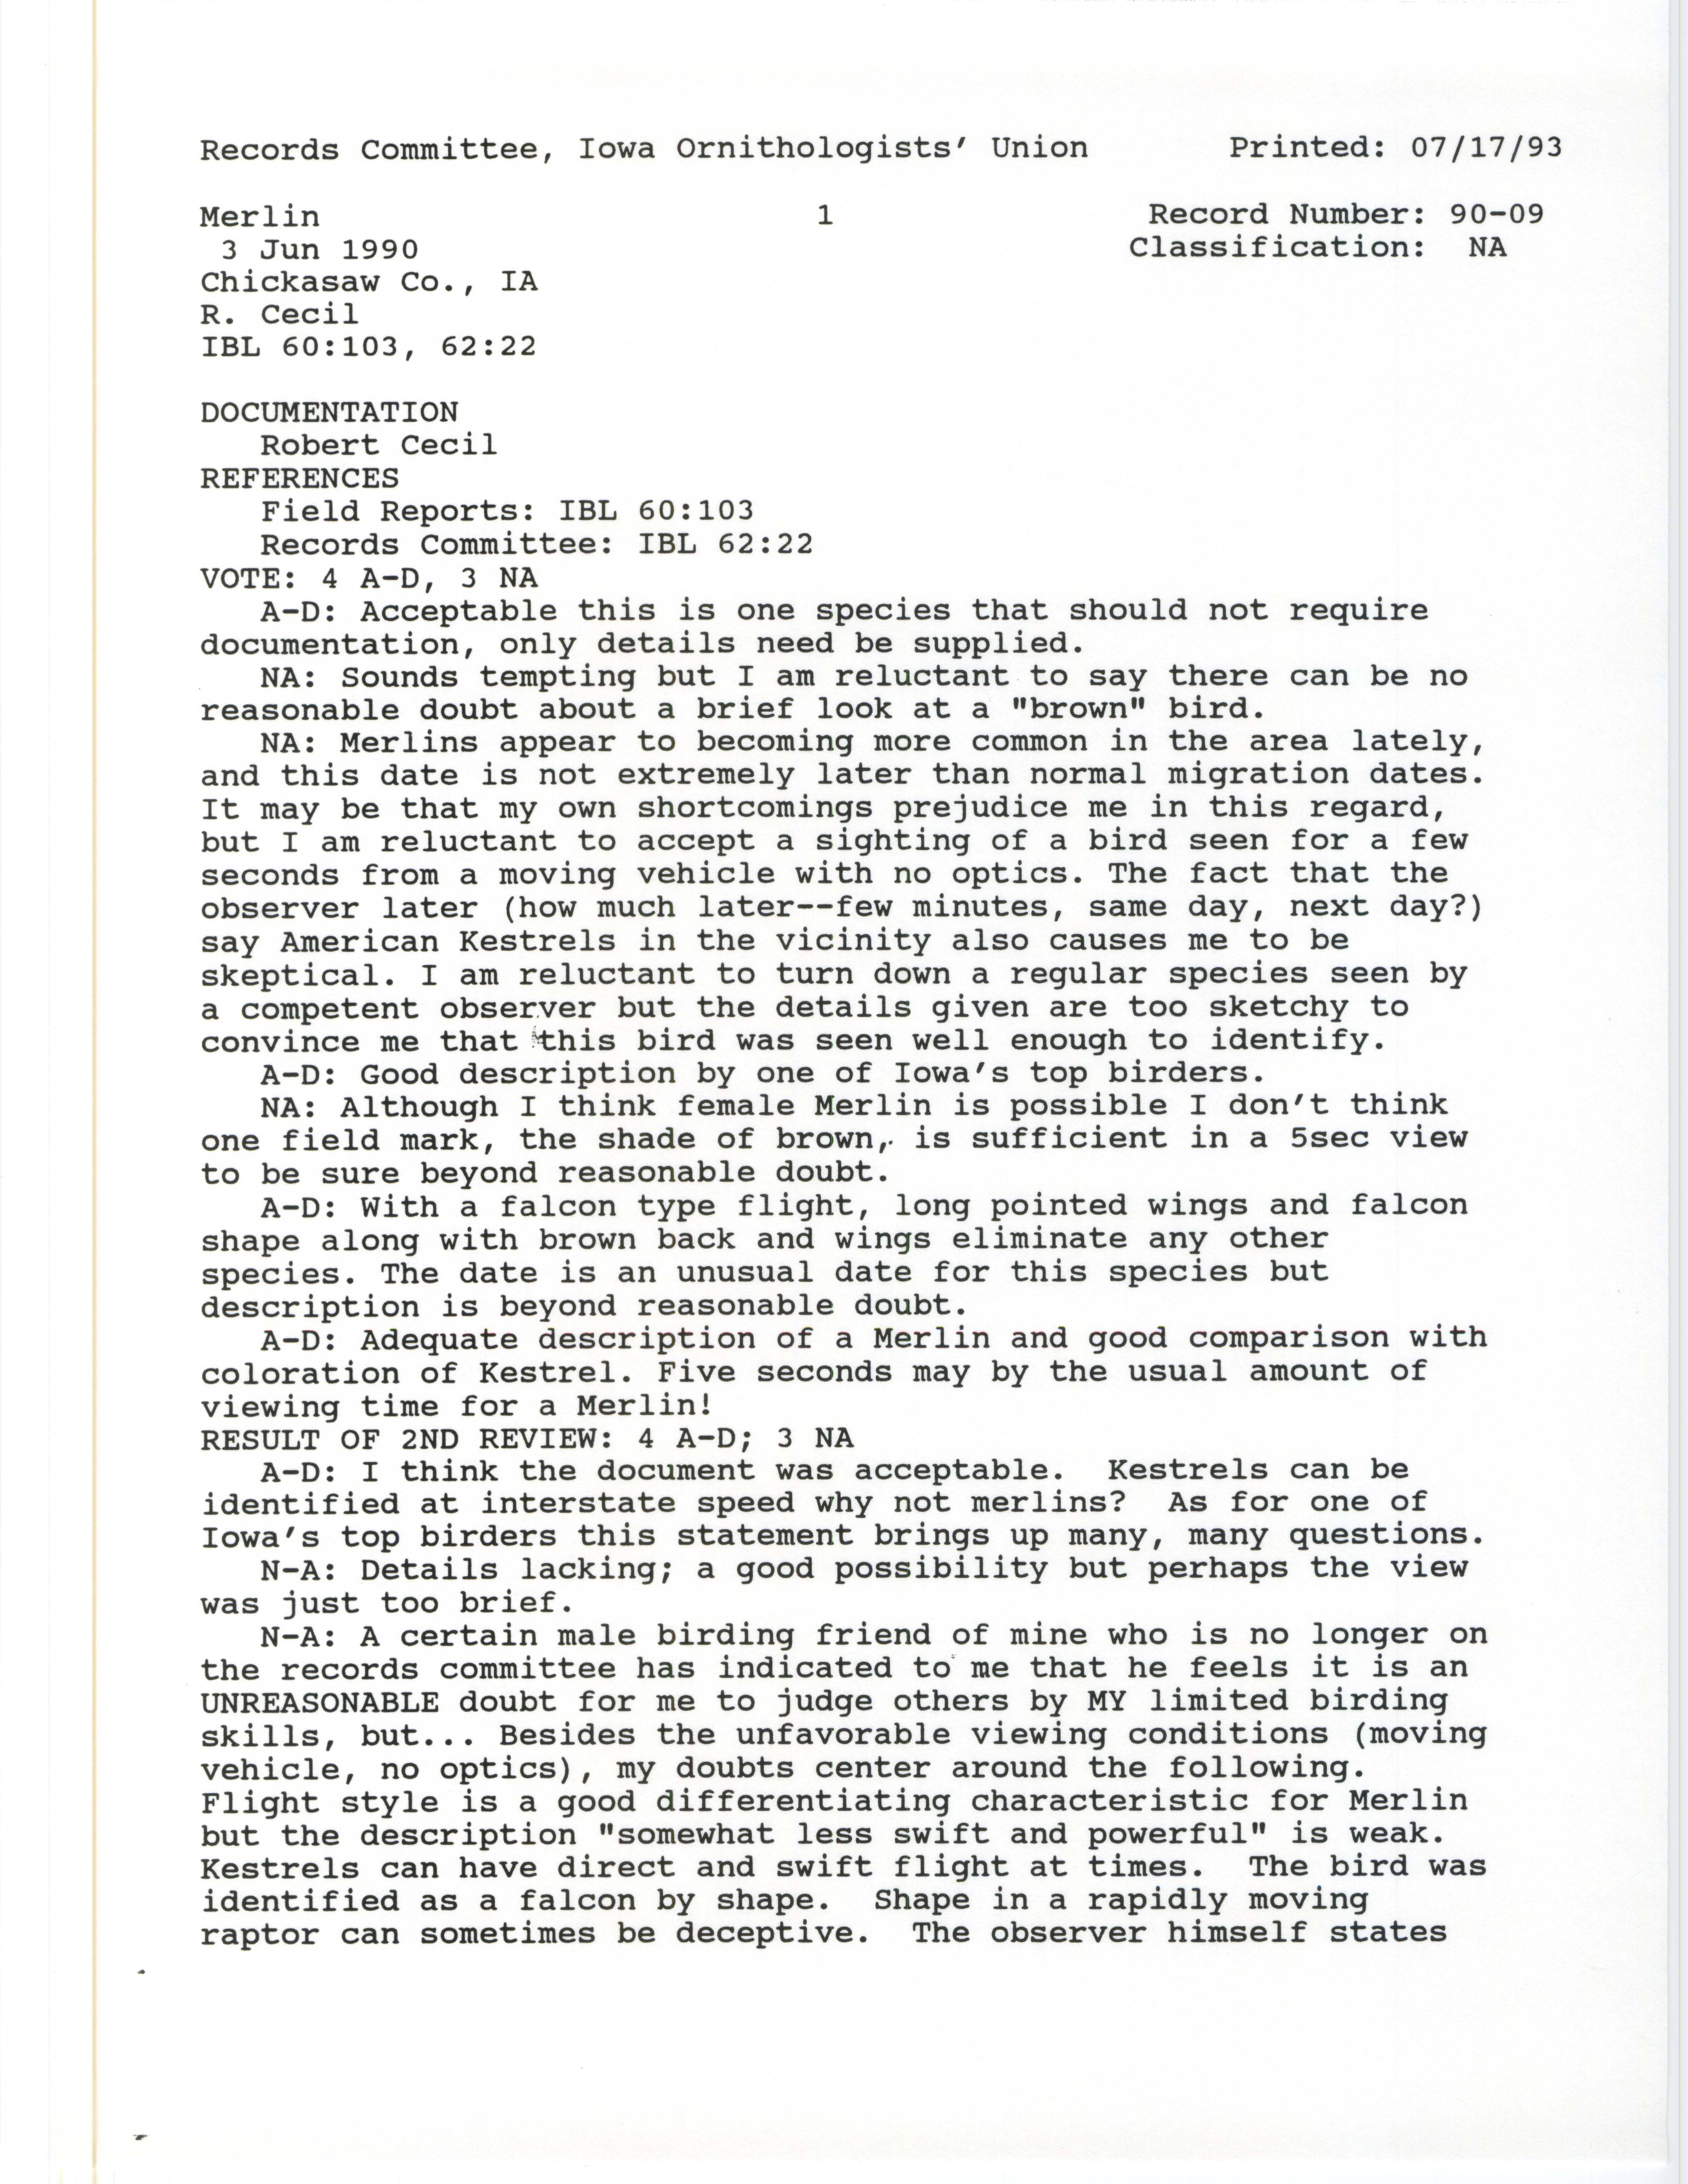 Records Committee review for rare bird sighting of Merlin in southwest Chickasaw, 1990